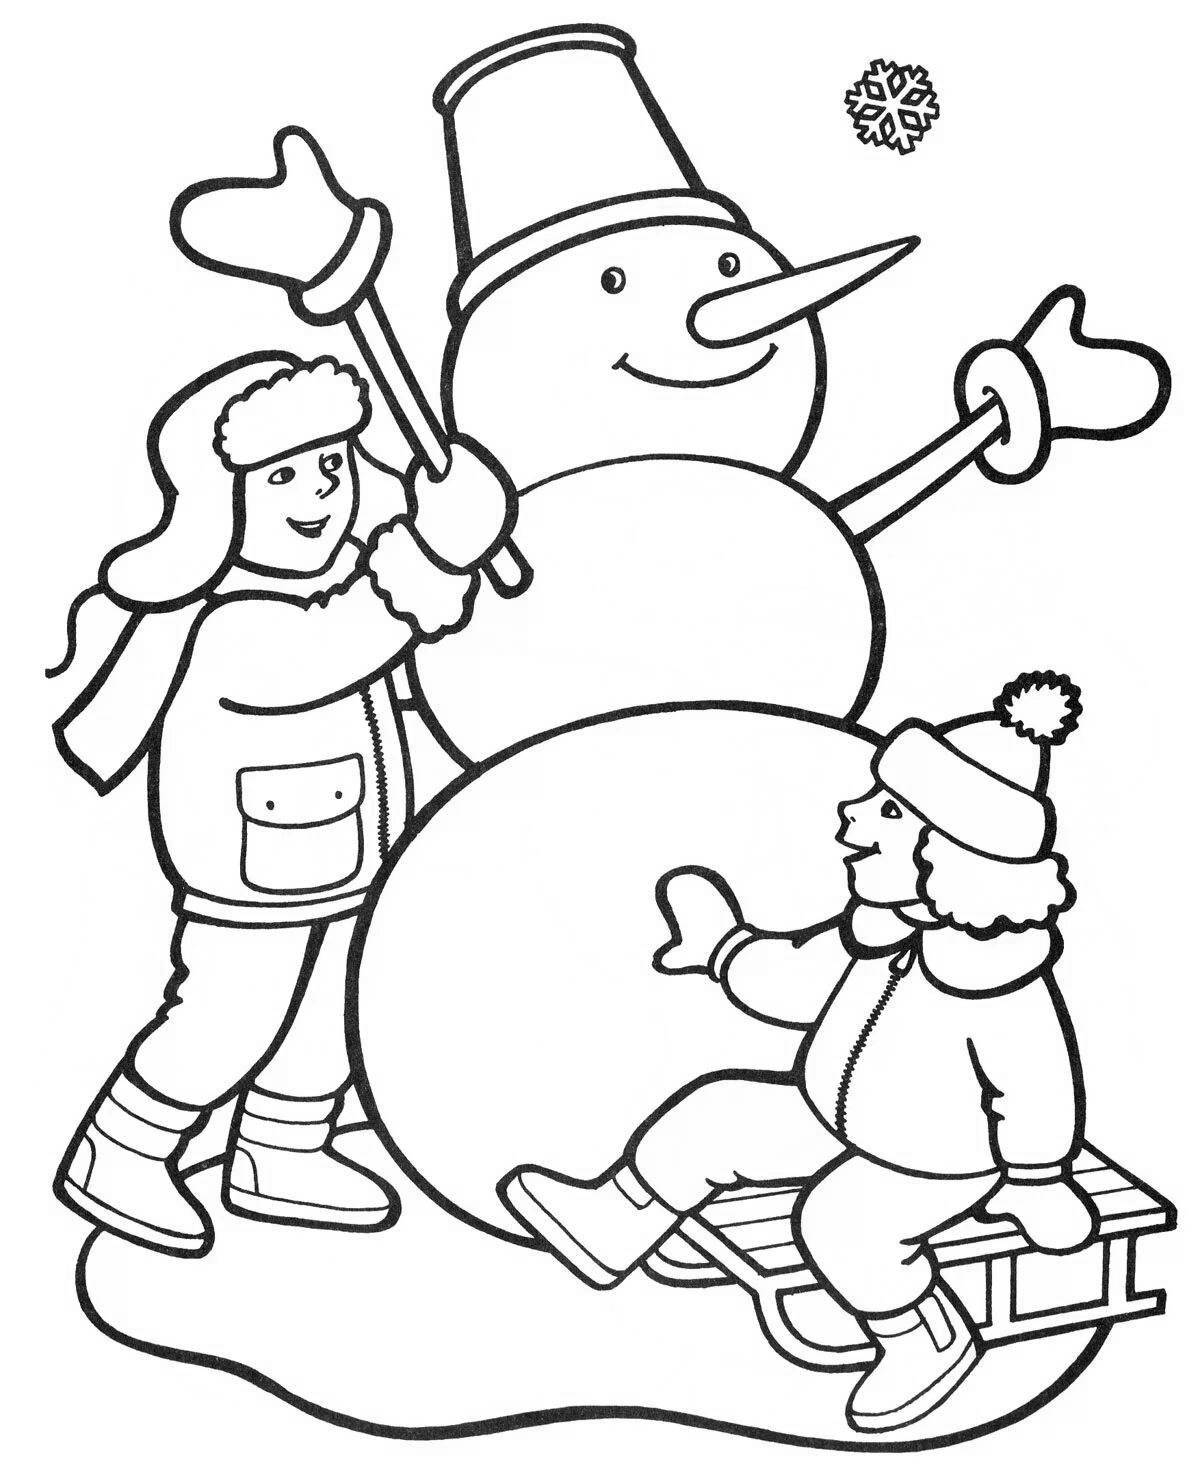 Fun kys coloring page for babies